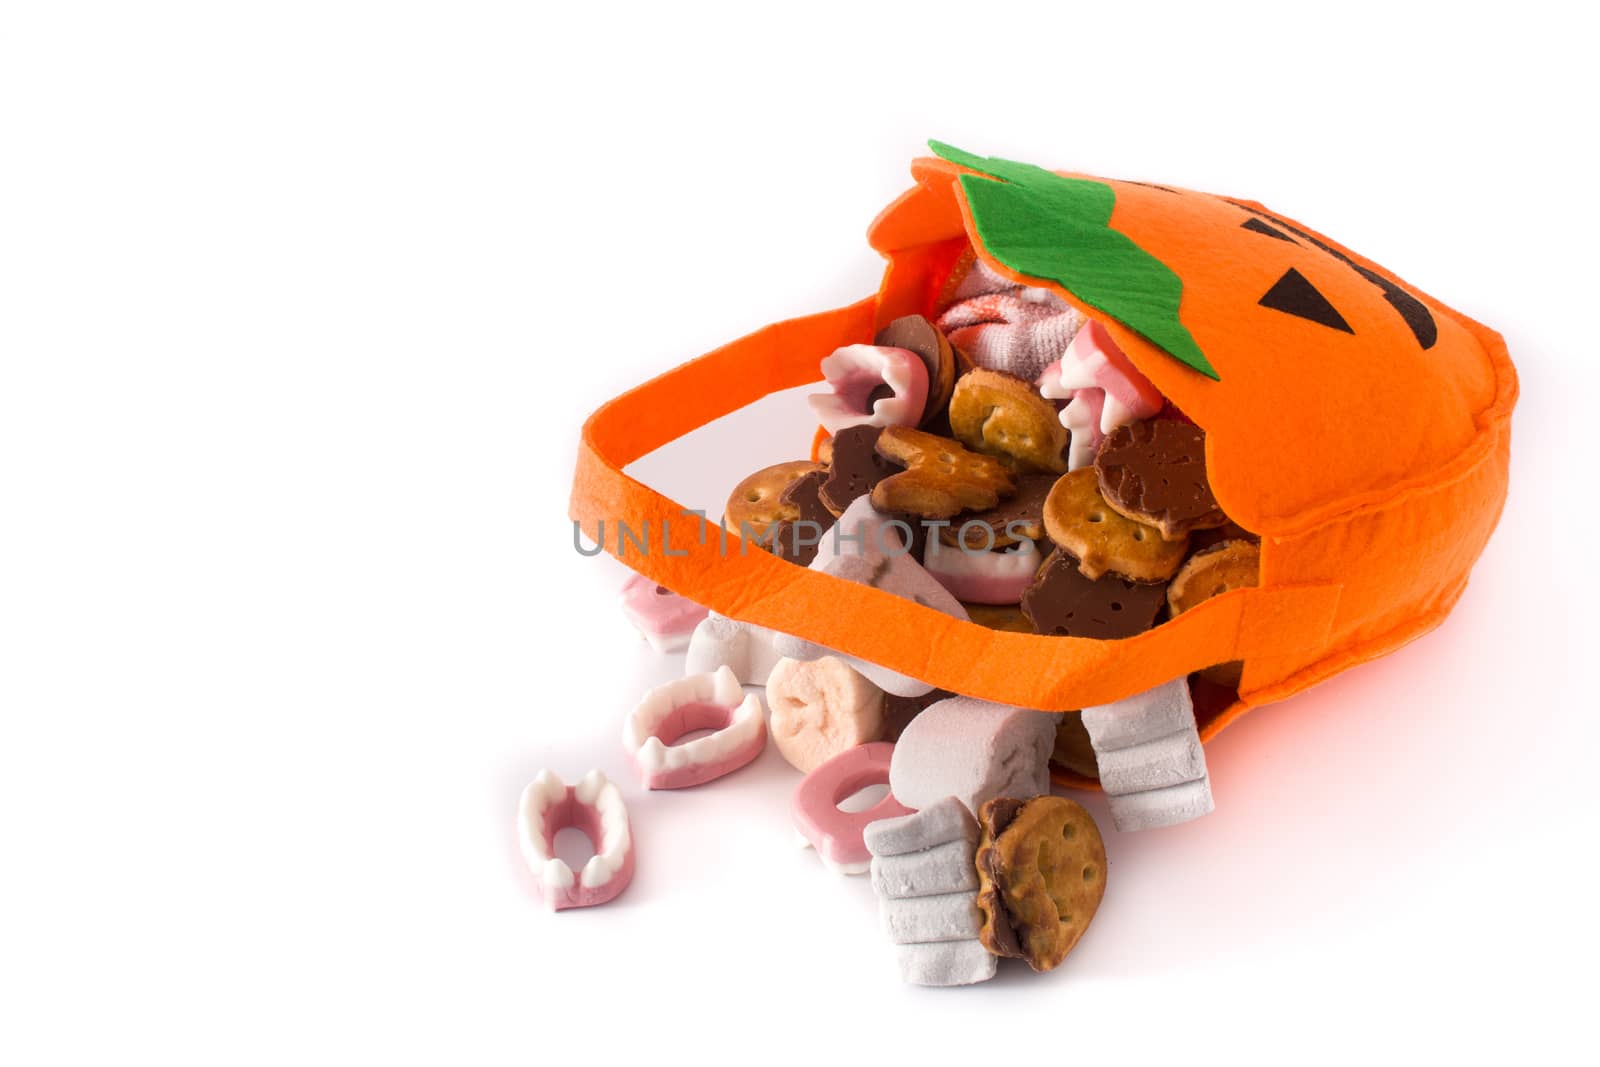 Halloween pumpkin bag with candies inside isolated on white background